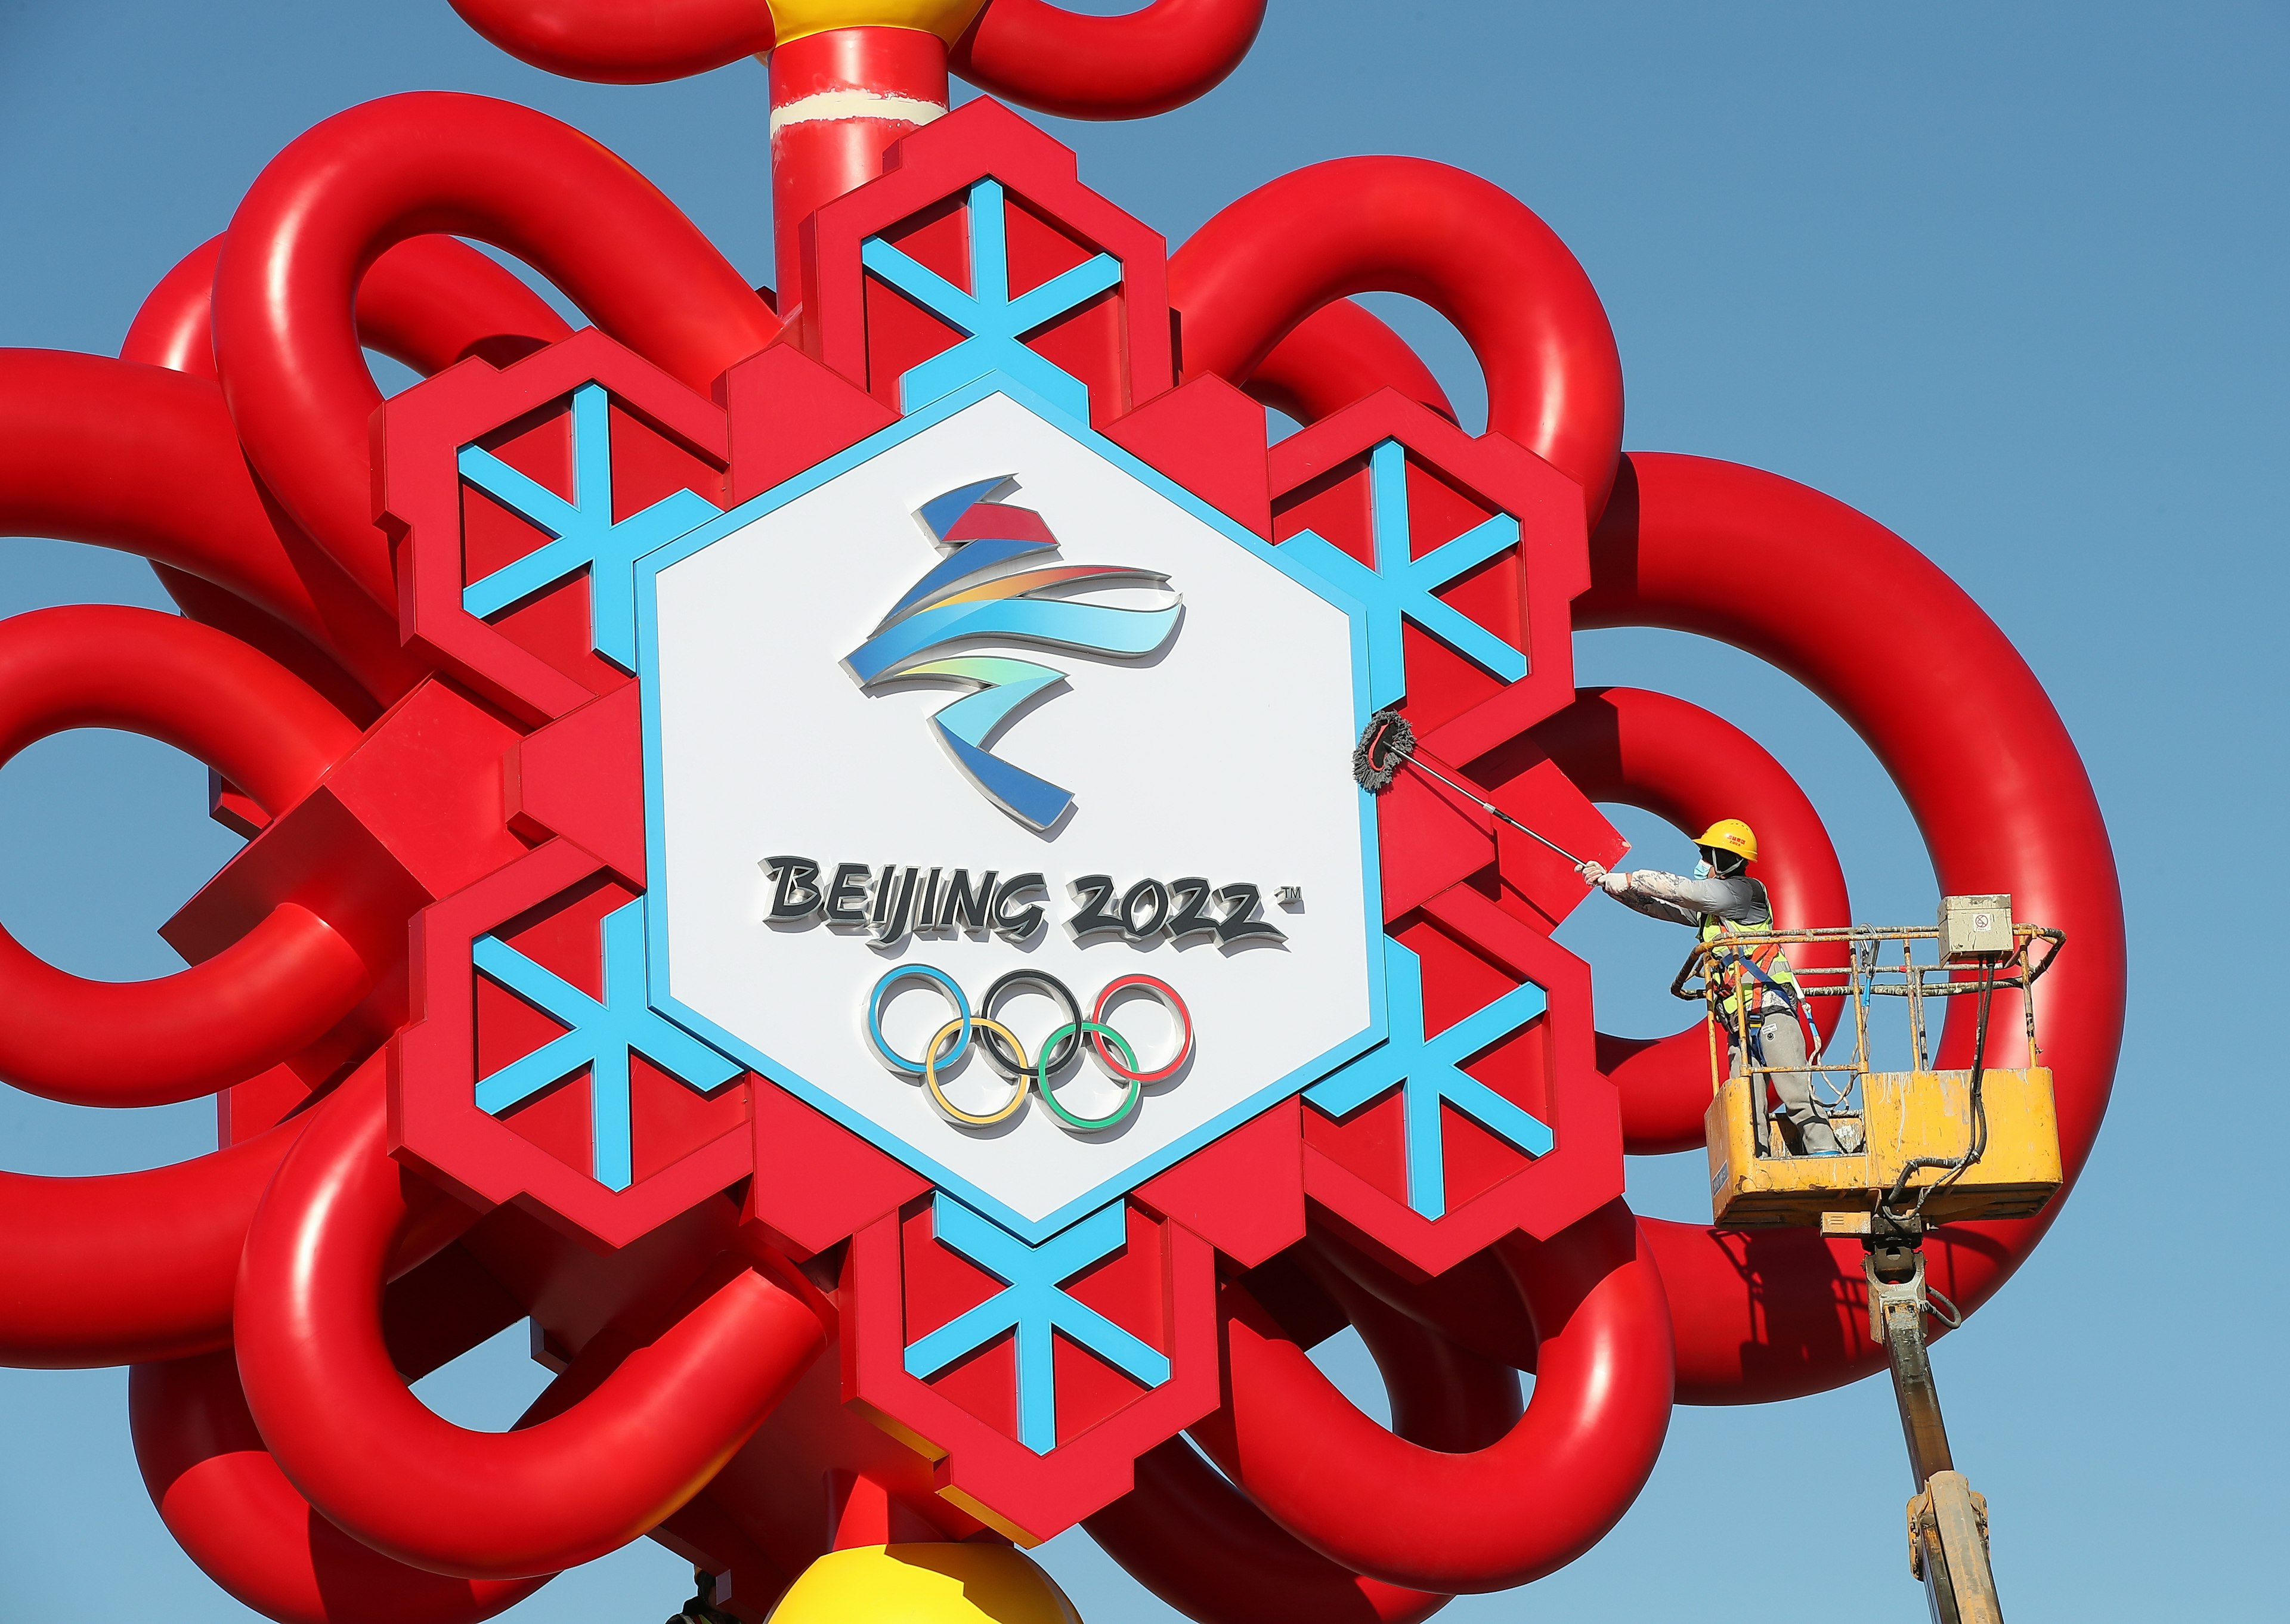 Big Winter Olympics-themed Chinese Knot Installed At Tian'anmen Square
BEIJING, CHINA - JANUARY 13: A worker clears the Winter Olympics-themed Chinese knot installation at Tian'anmen Square on January 13, 2022 in Beijing, China. (Photo by Wang Xin/VCG via Getty Images)